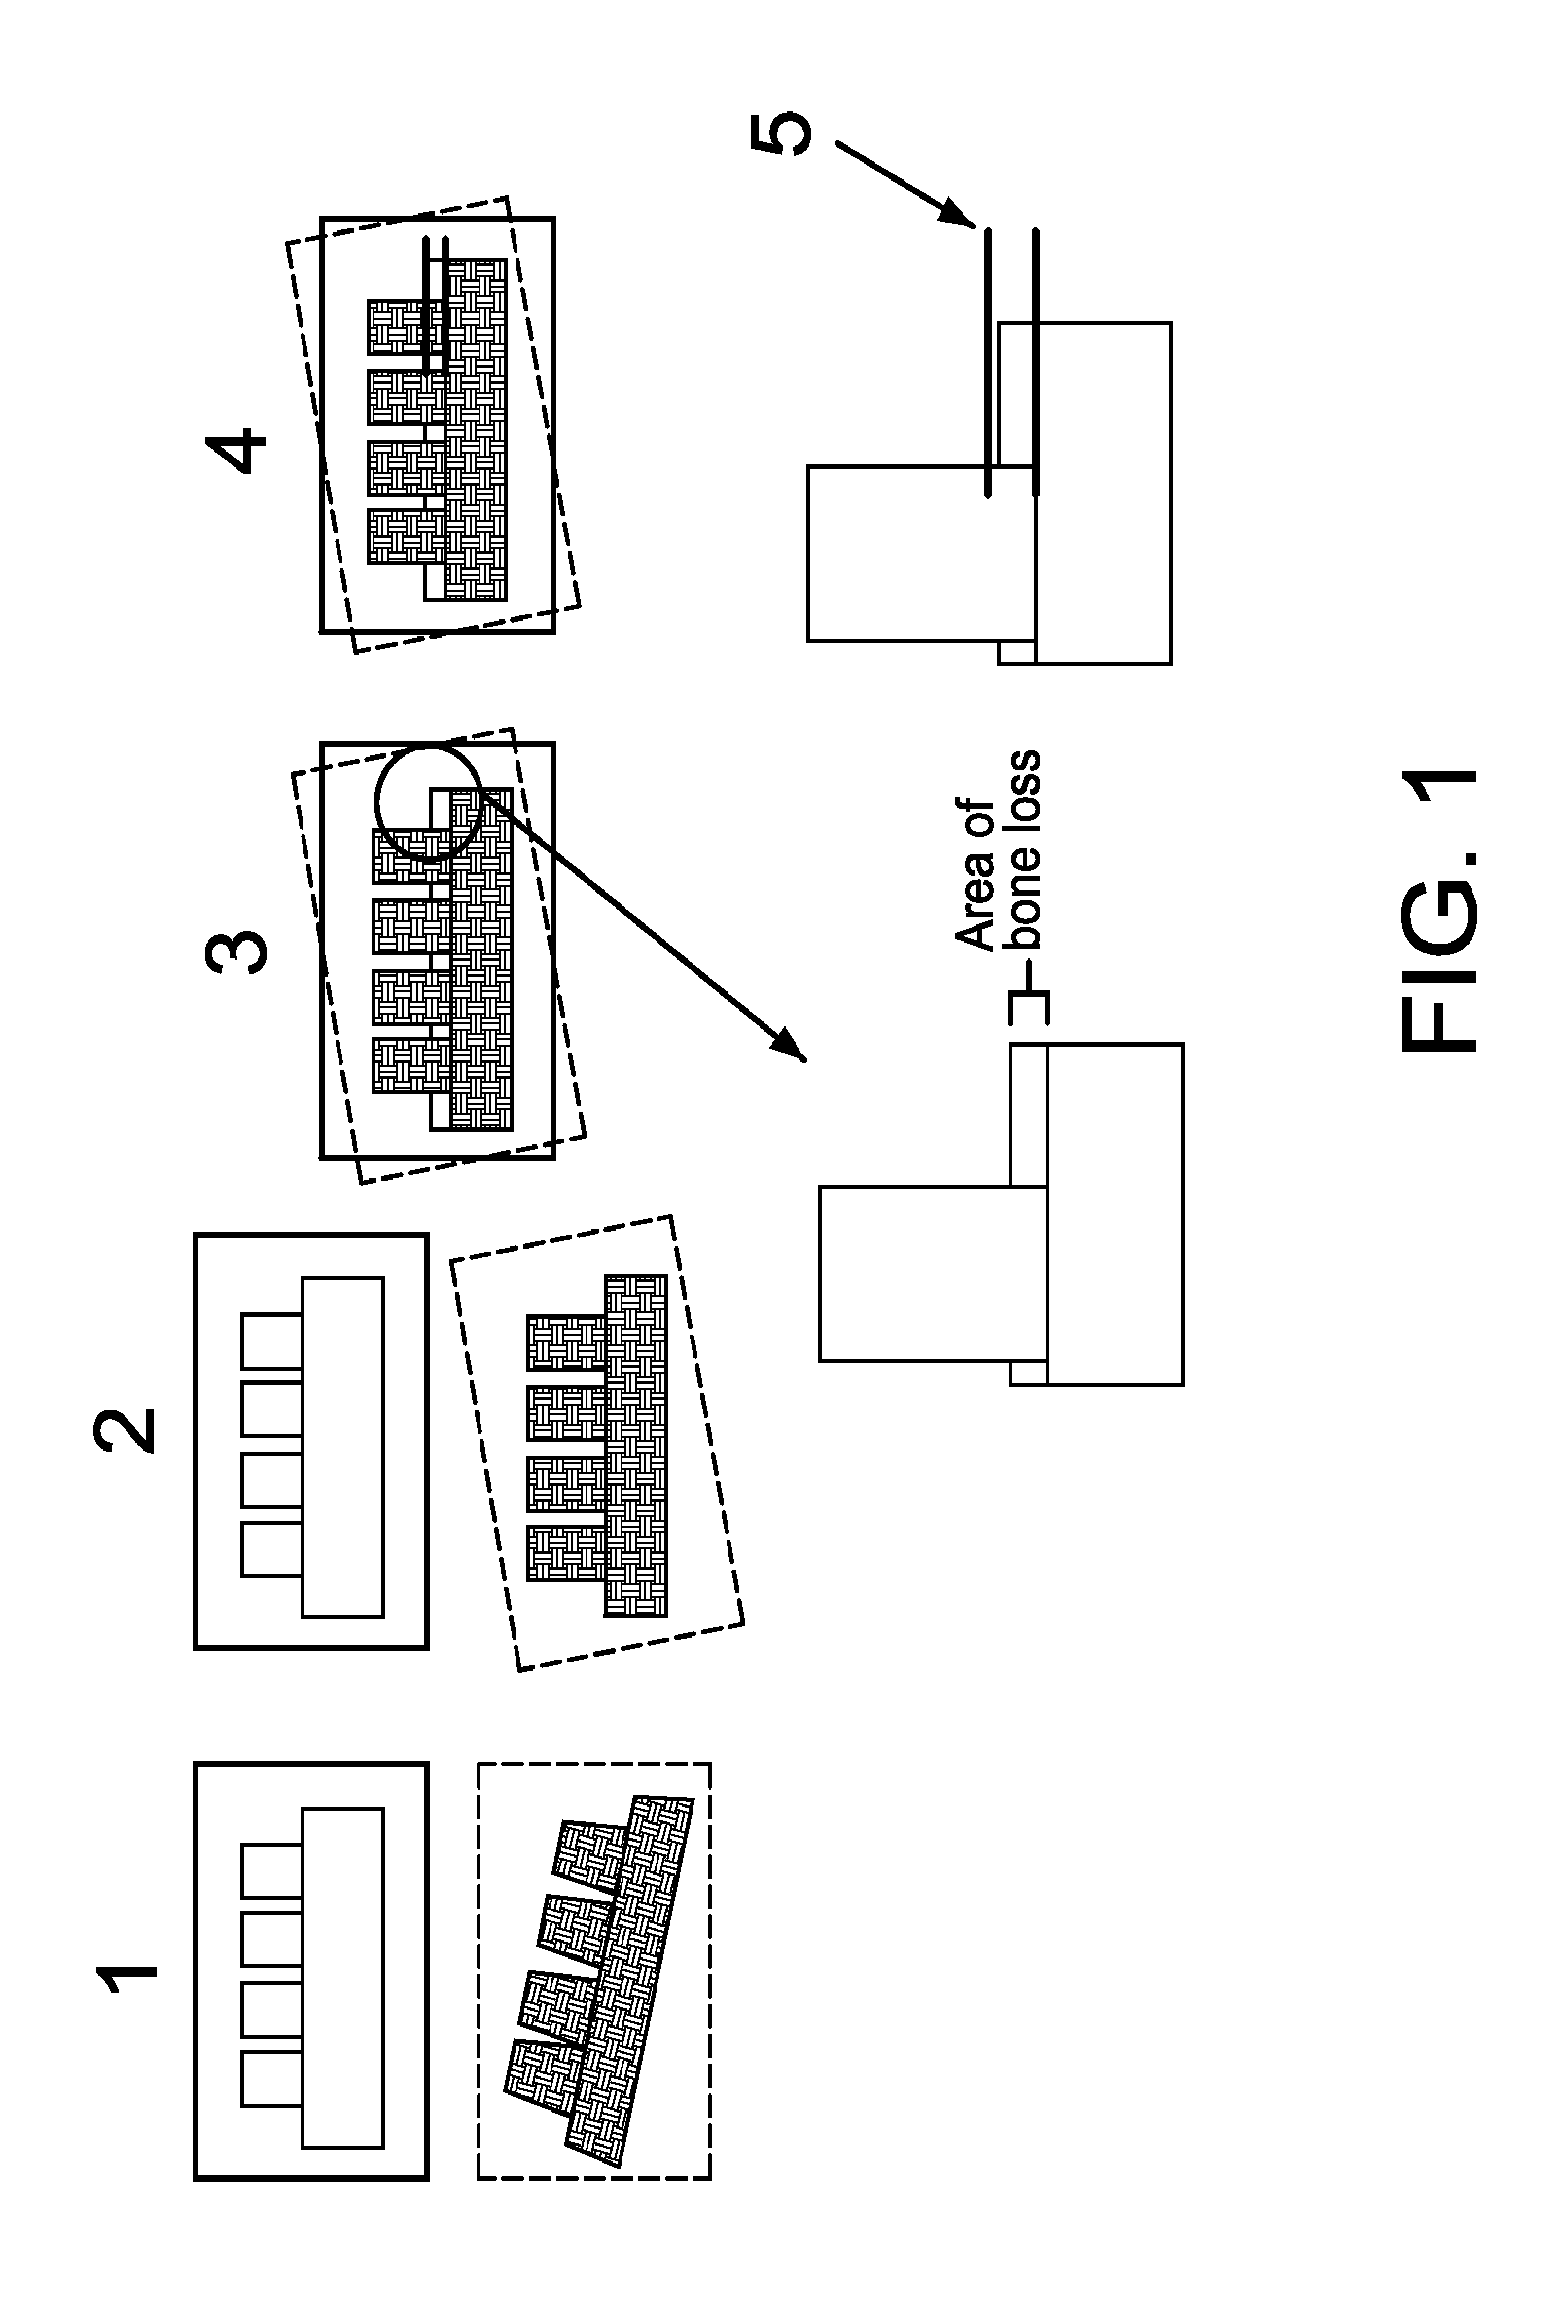 System and method for detecting and tracking change in dental X-rays and dental images